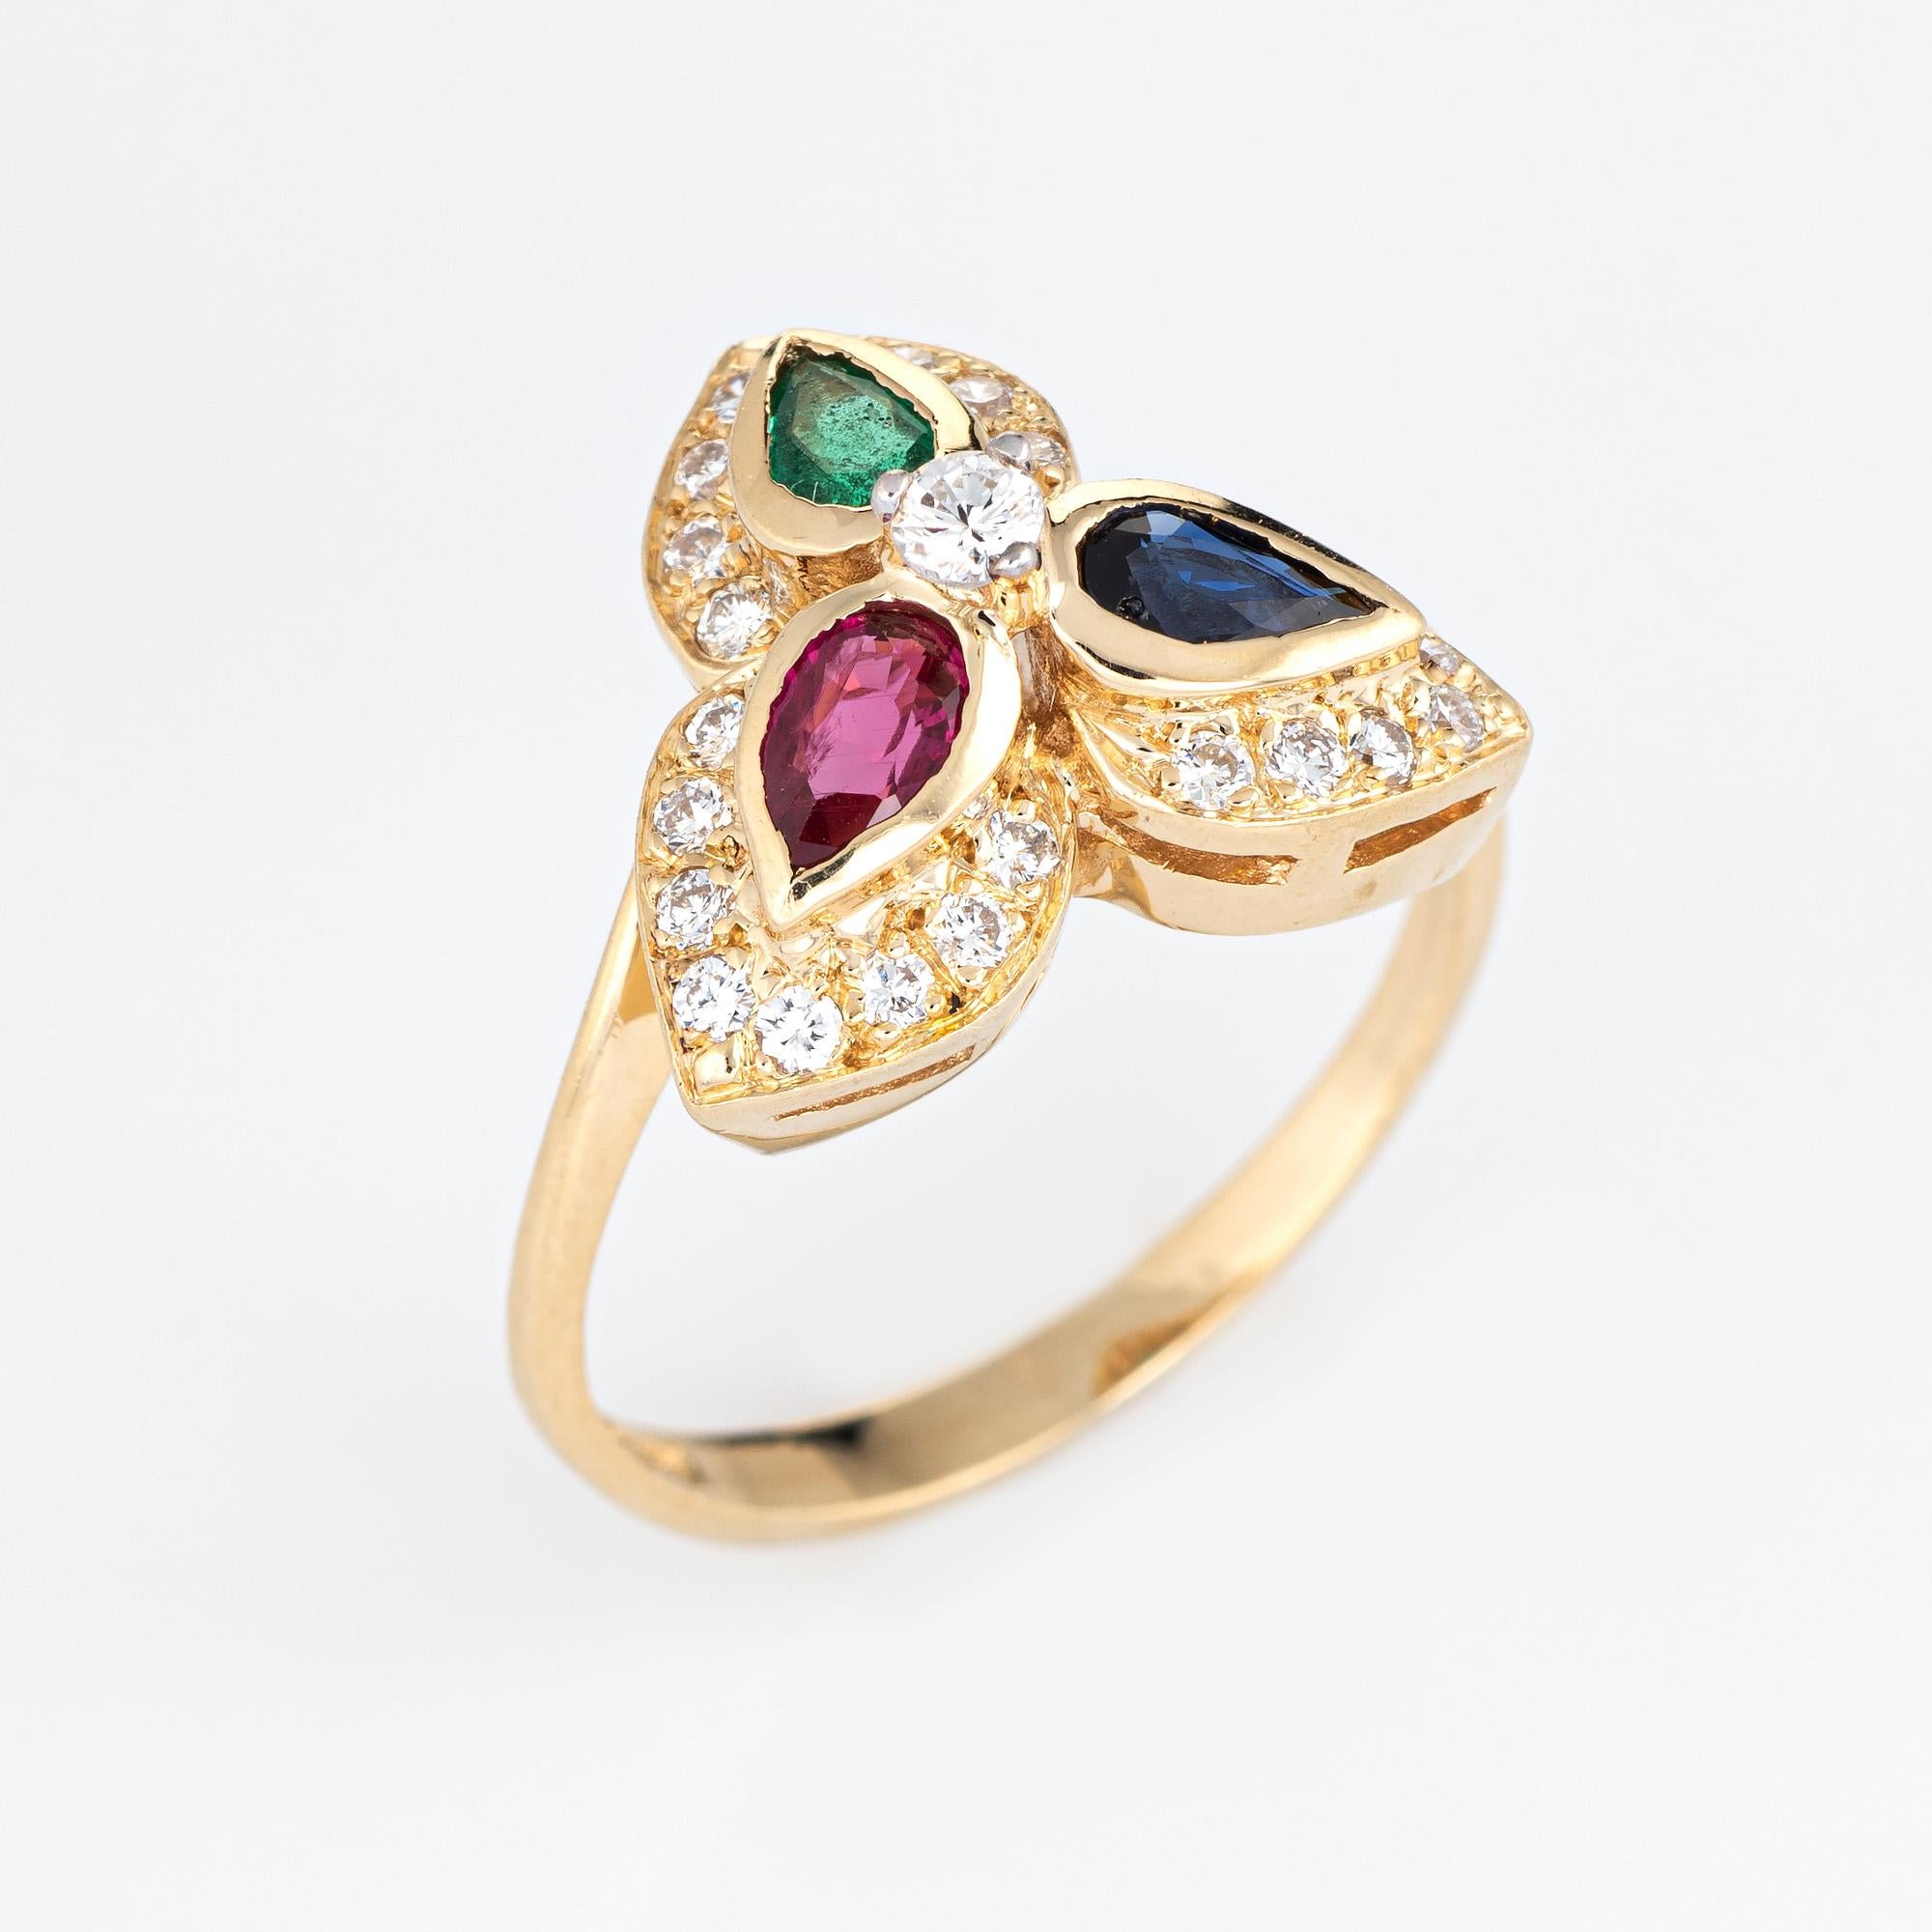 Stylish vintage gemstone & diamond cocktail ring crafted in 14 karat yellow gold. 

Pear cut emerald, sapphire & ruby measure 5mm x 2.5mm each (estimated at 0.15 carats each - 0.45 carats total estimated weight). The diamonds total an estimated 0.53